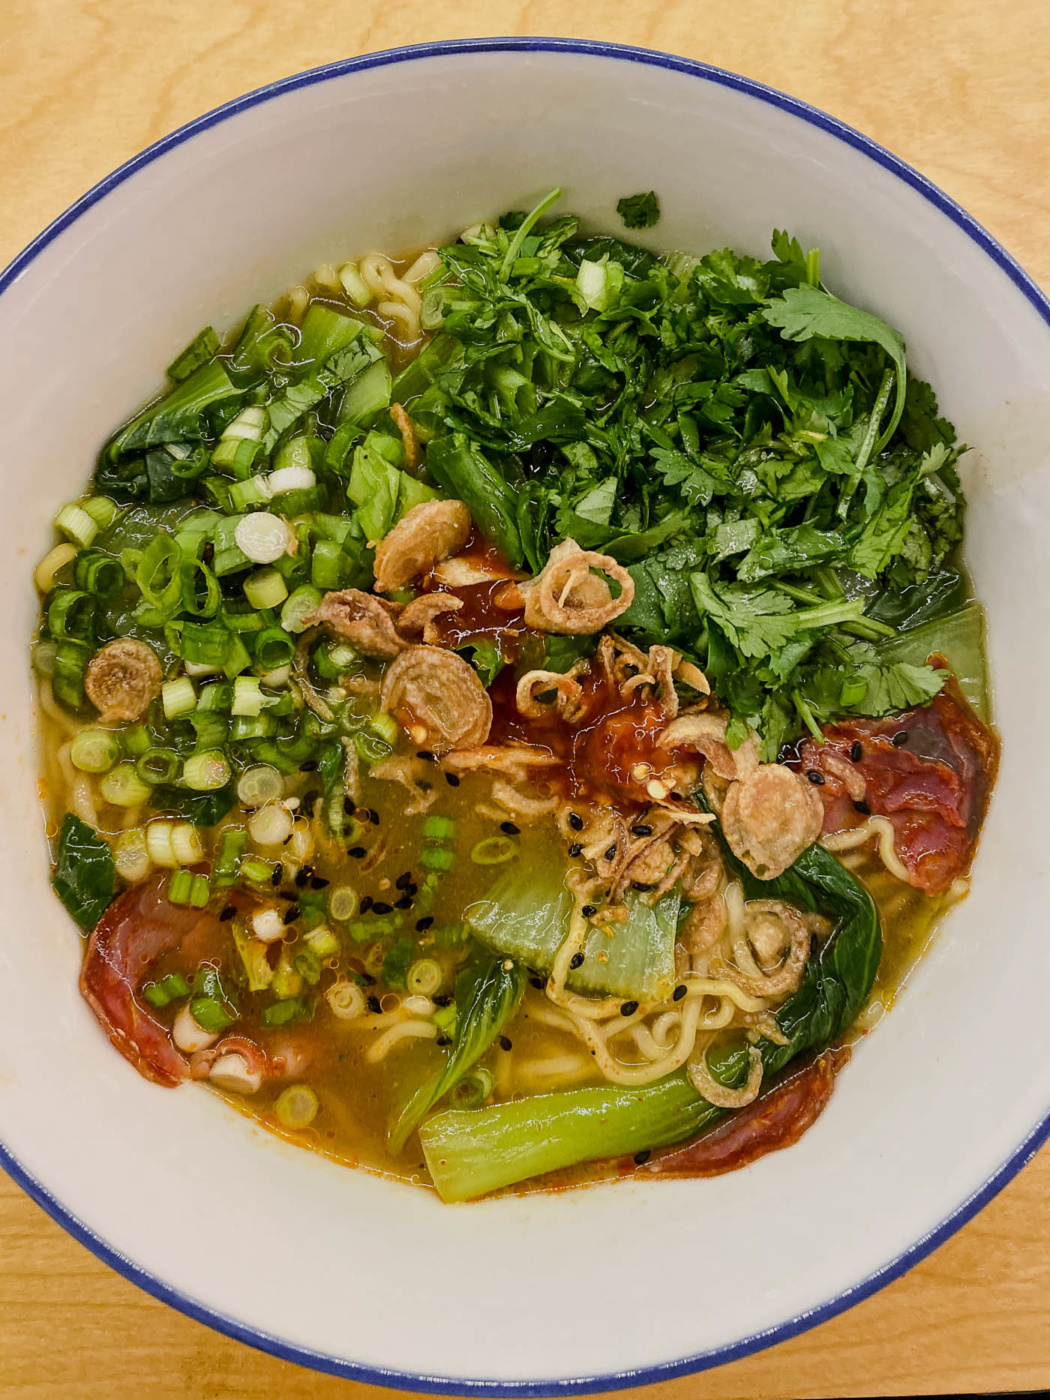 I like to throw the kitchin sink at my Ramen! Just kidding, but adding some chorizo and charred bok choy to a homemade miso and shiitake broth was one of these cooking with whats left in the fridge that ended up on repeat.